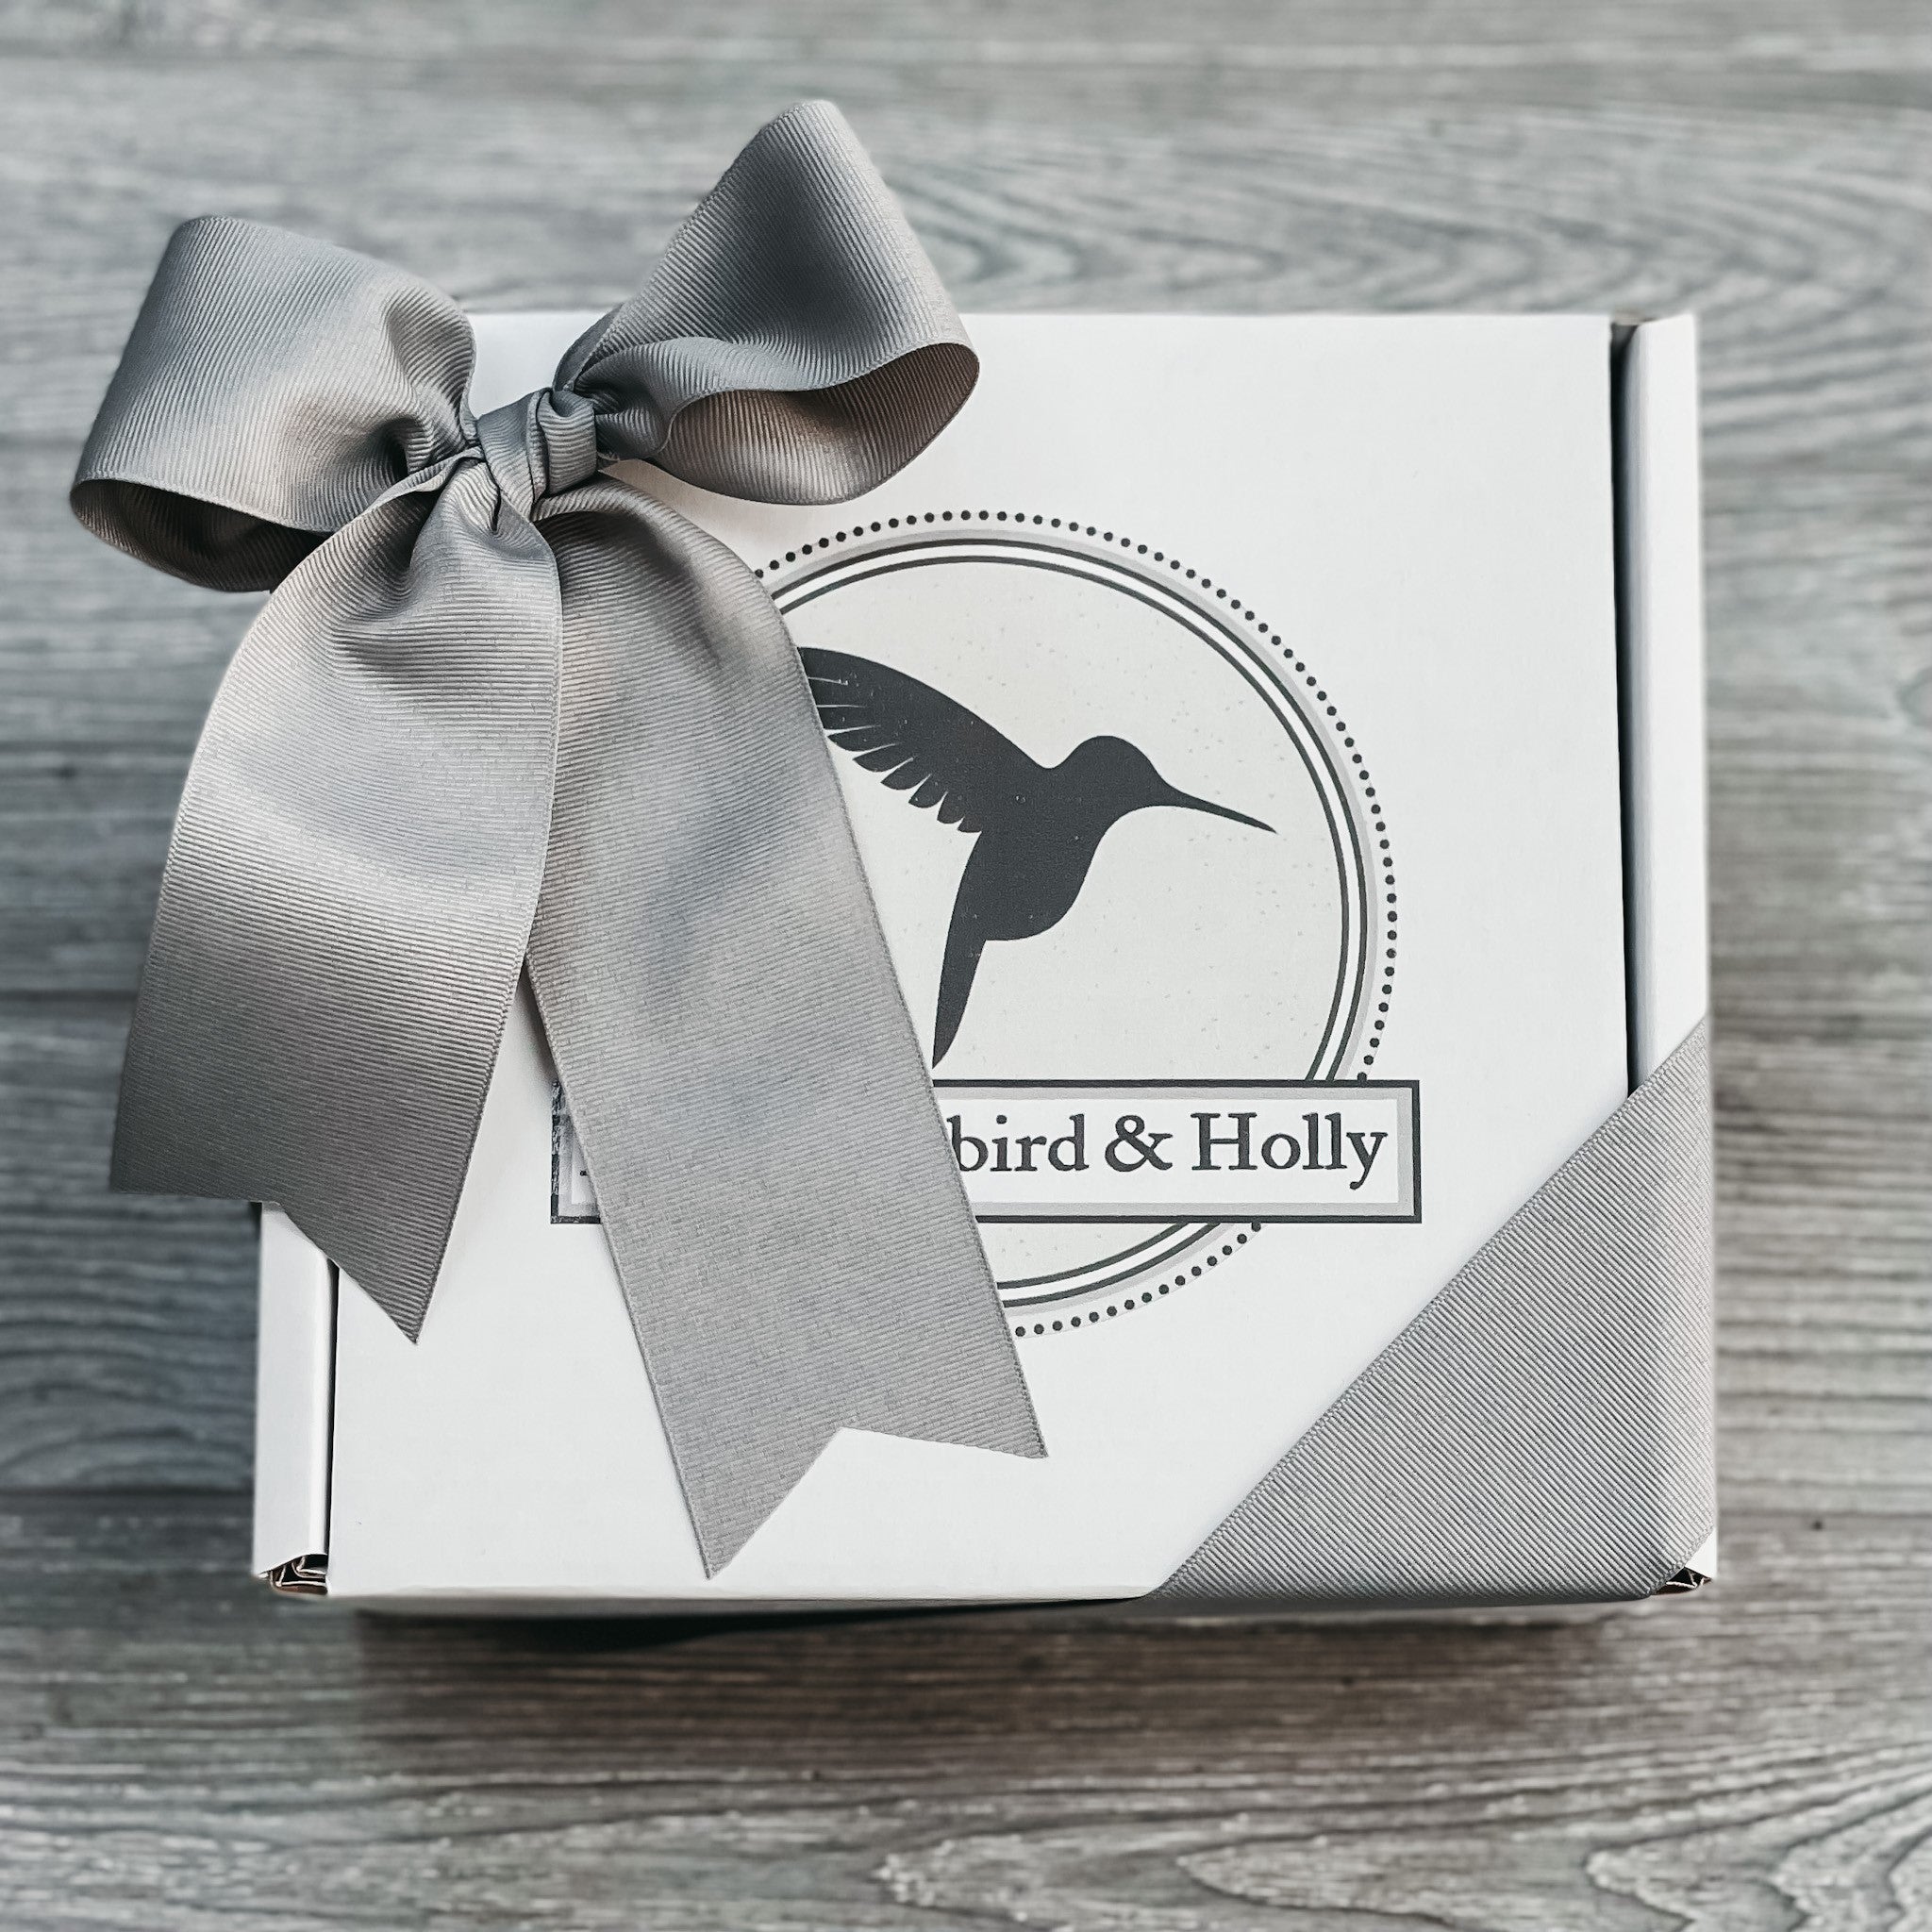 signature gift box included in the grateful gift basket